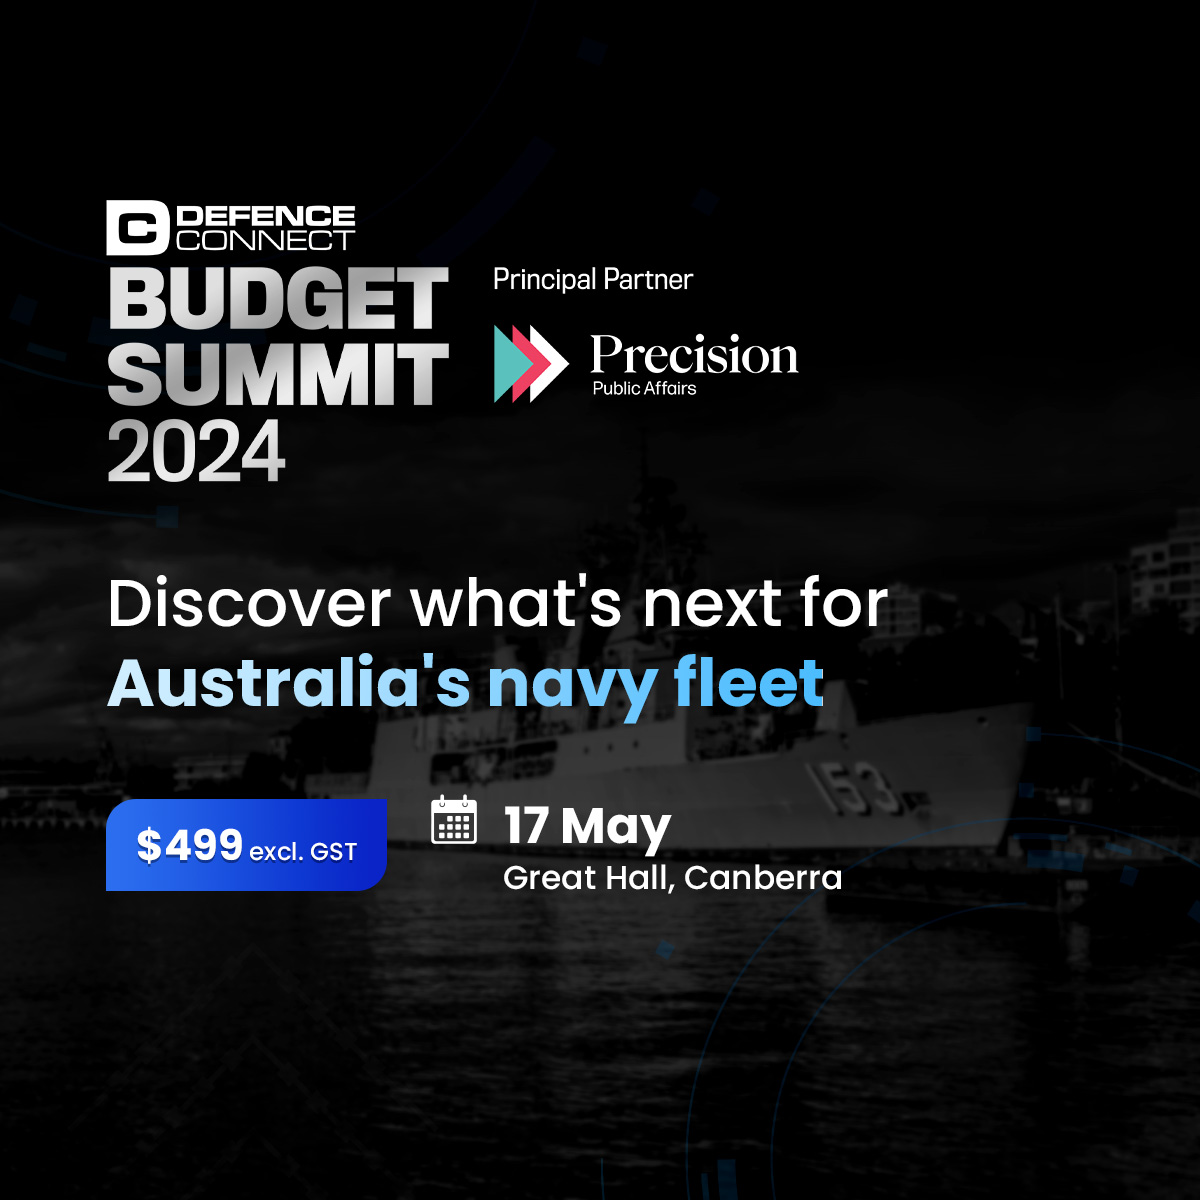 Following the release of the Independent Analysis into Navy's Surface Combatant Fleet, chart the course for Australia's naval capabilities at the #DefenceConnectBudgetSummit 2024.
bit.ly/3UlnNN8 

#defence #nationalsecurity #budget #governmentfunding #strategy #policy